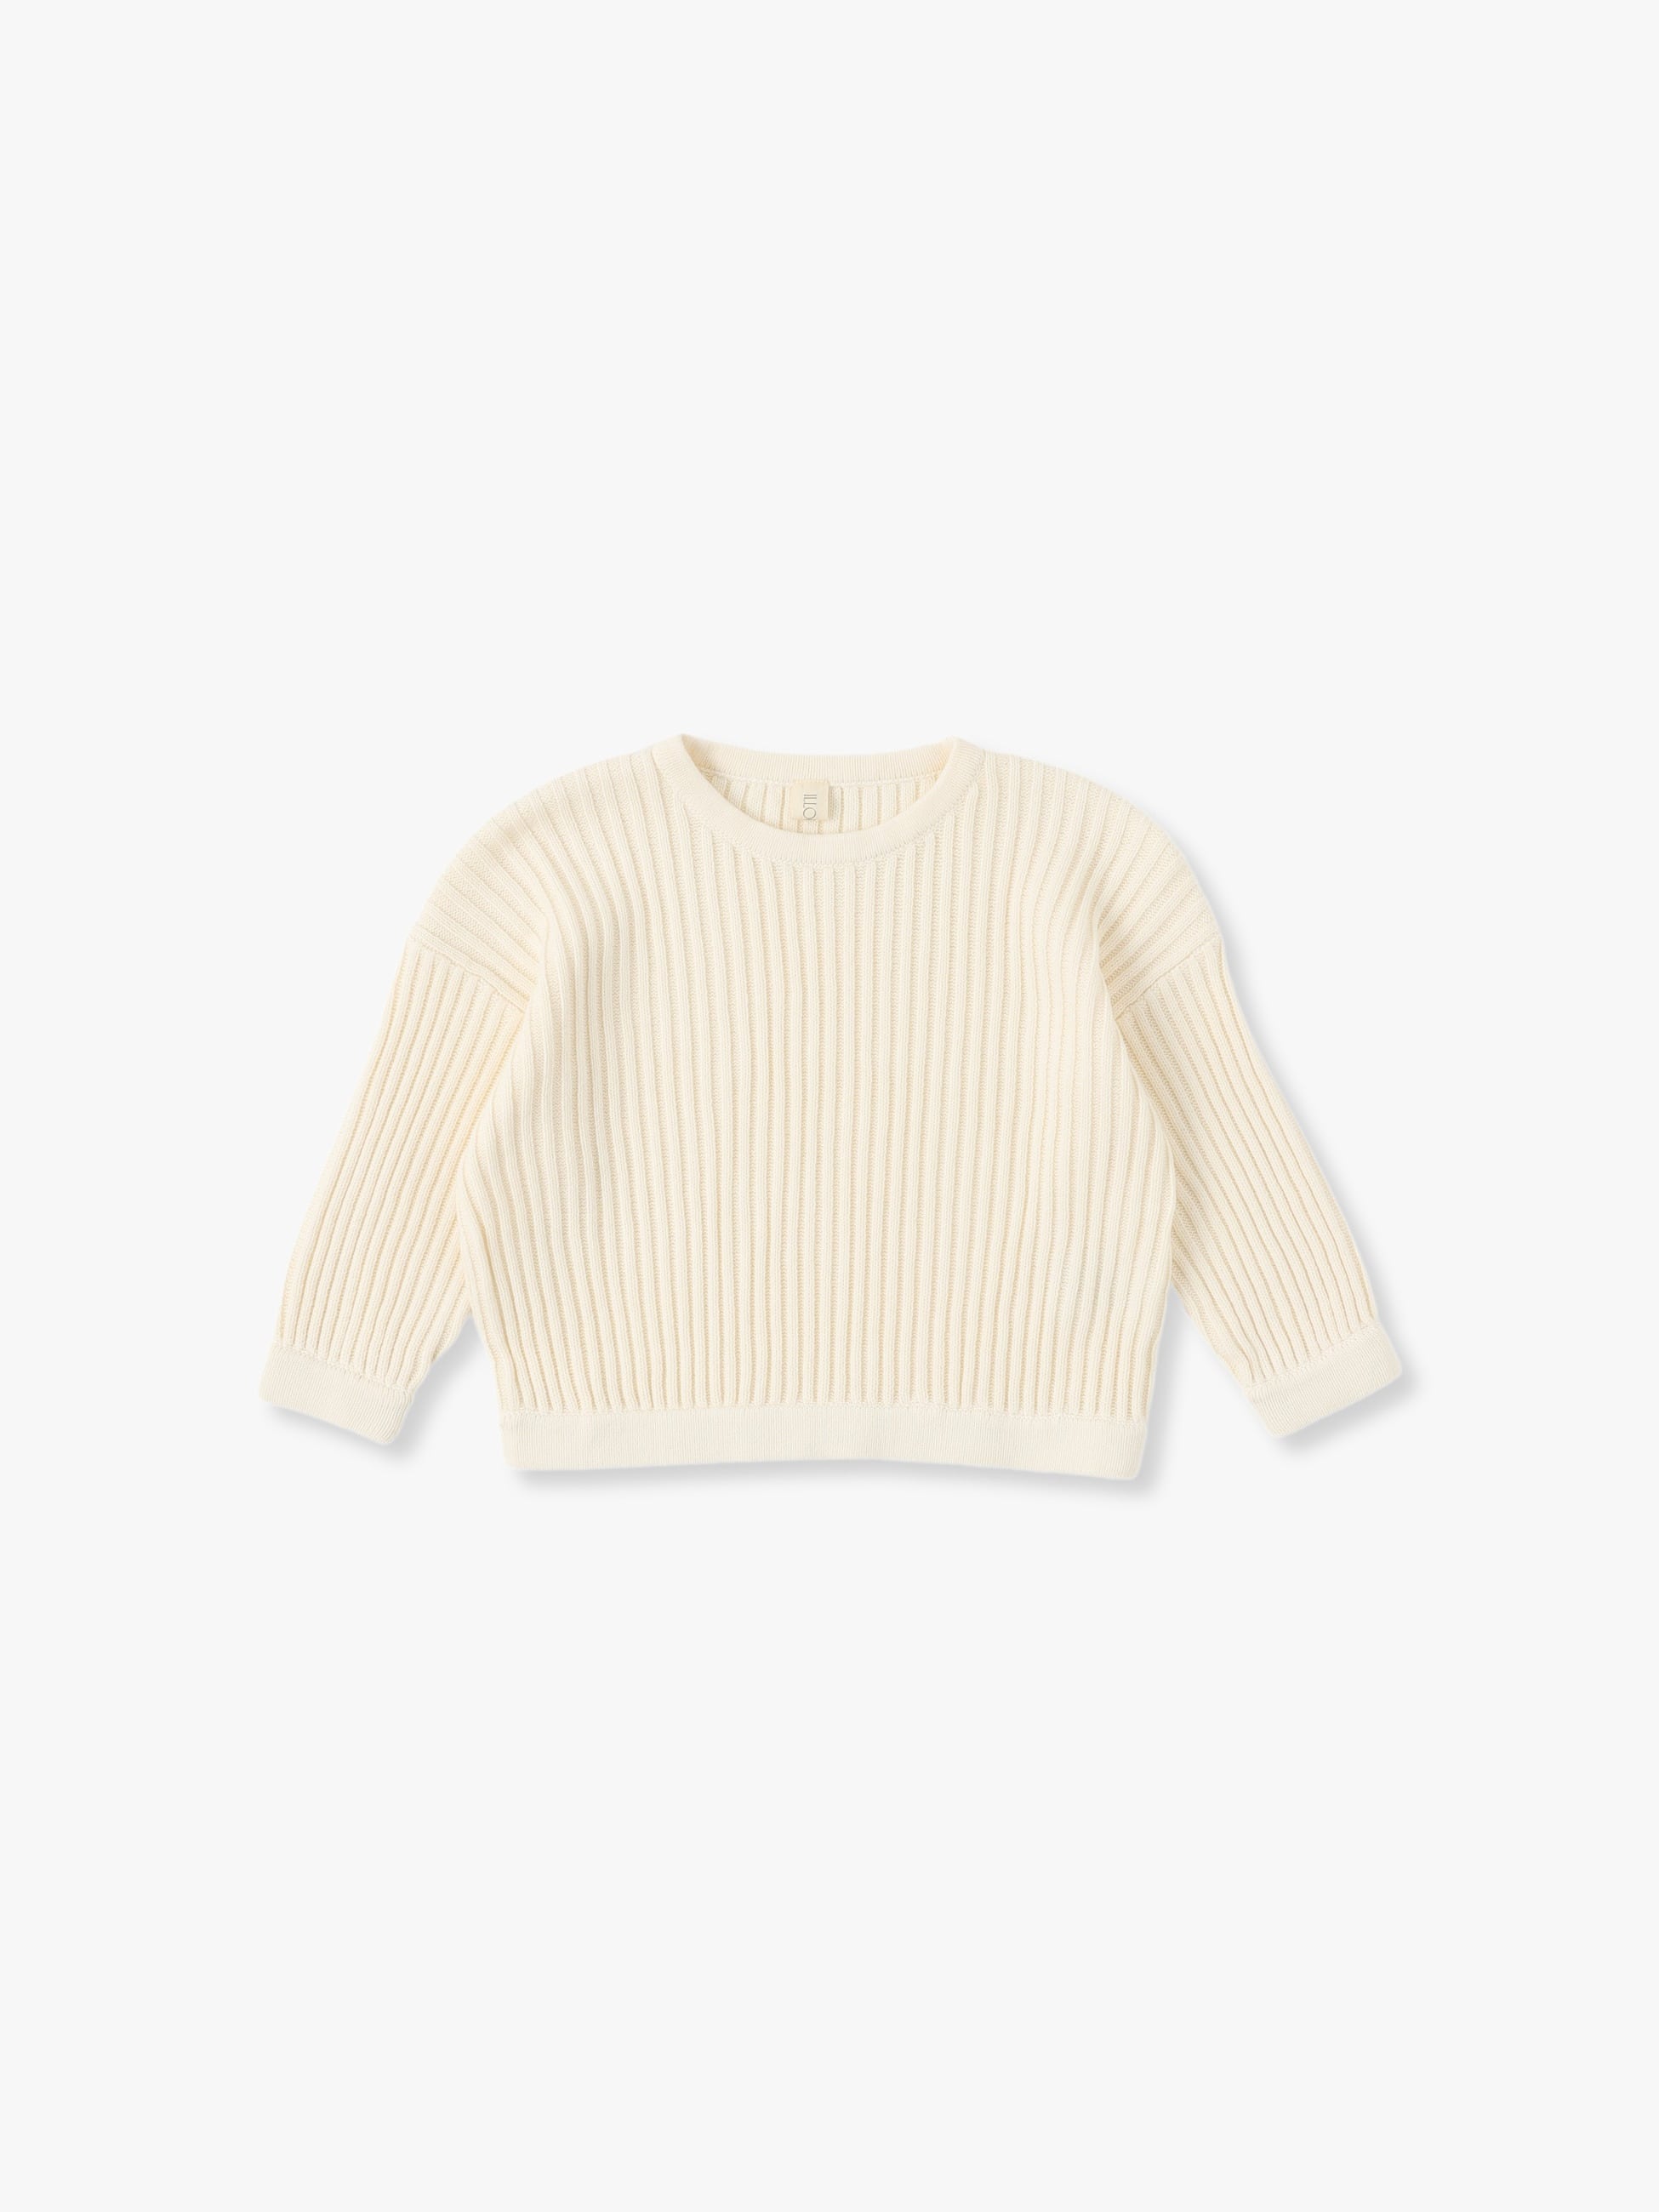 Oversized Essential Rib Knit Pullover 詳細画像 off white 3